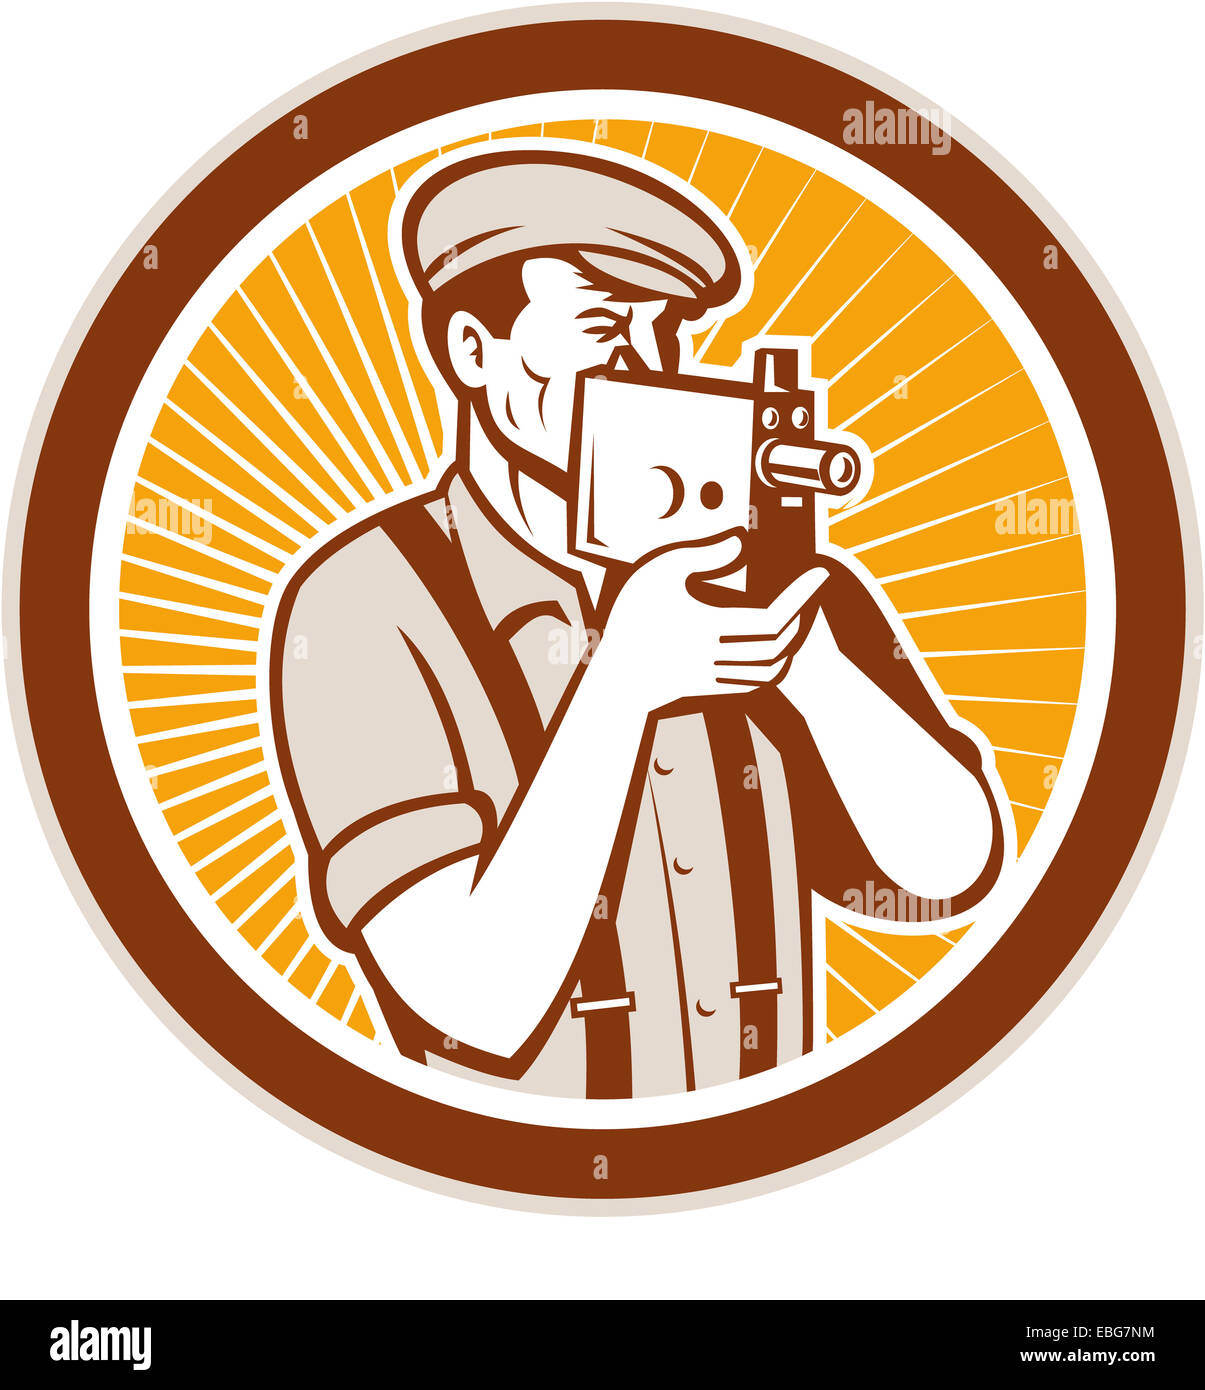 Illustration of a photographer wearing hat and suspenders shooting aiming with vintage camera set inside circle done in retro style. Stock Photo